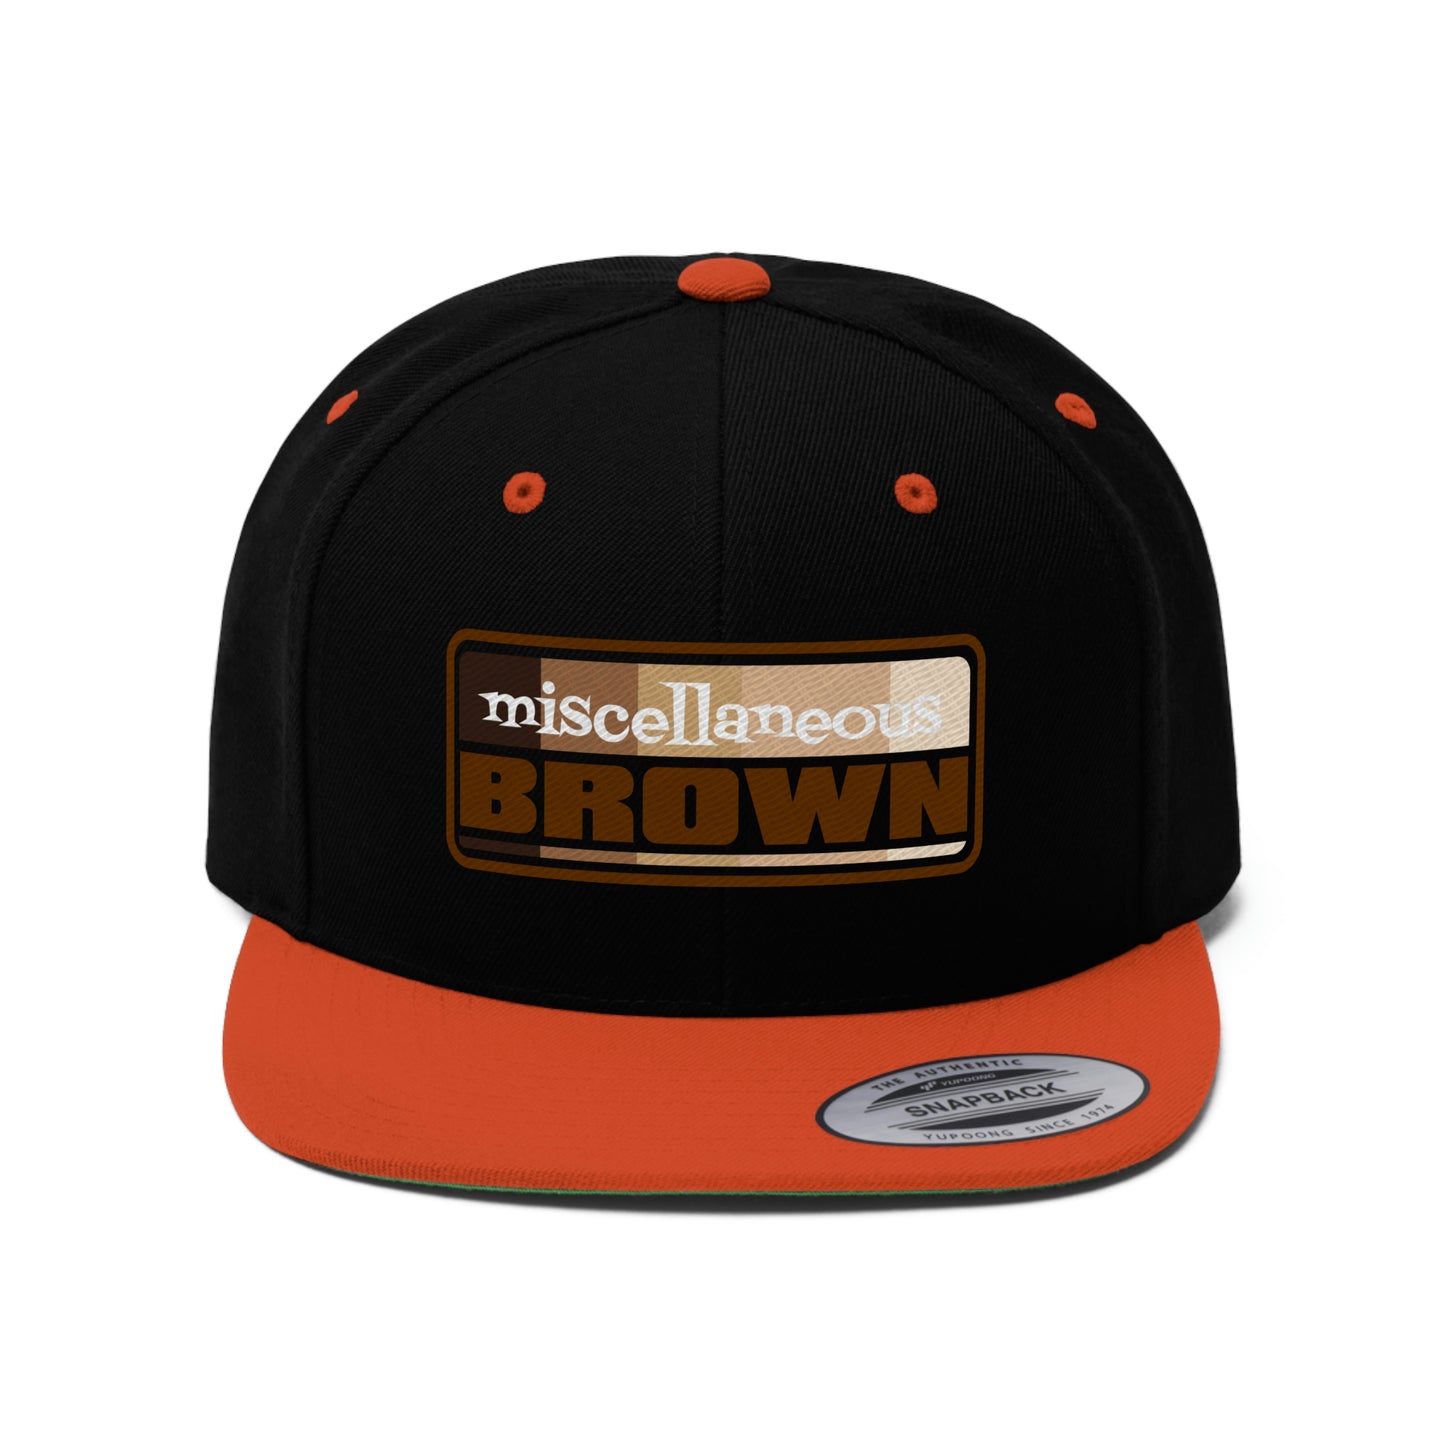 Miscellaneous Brown Comedy Special Unisex Flat Bill Hat